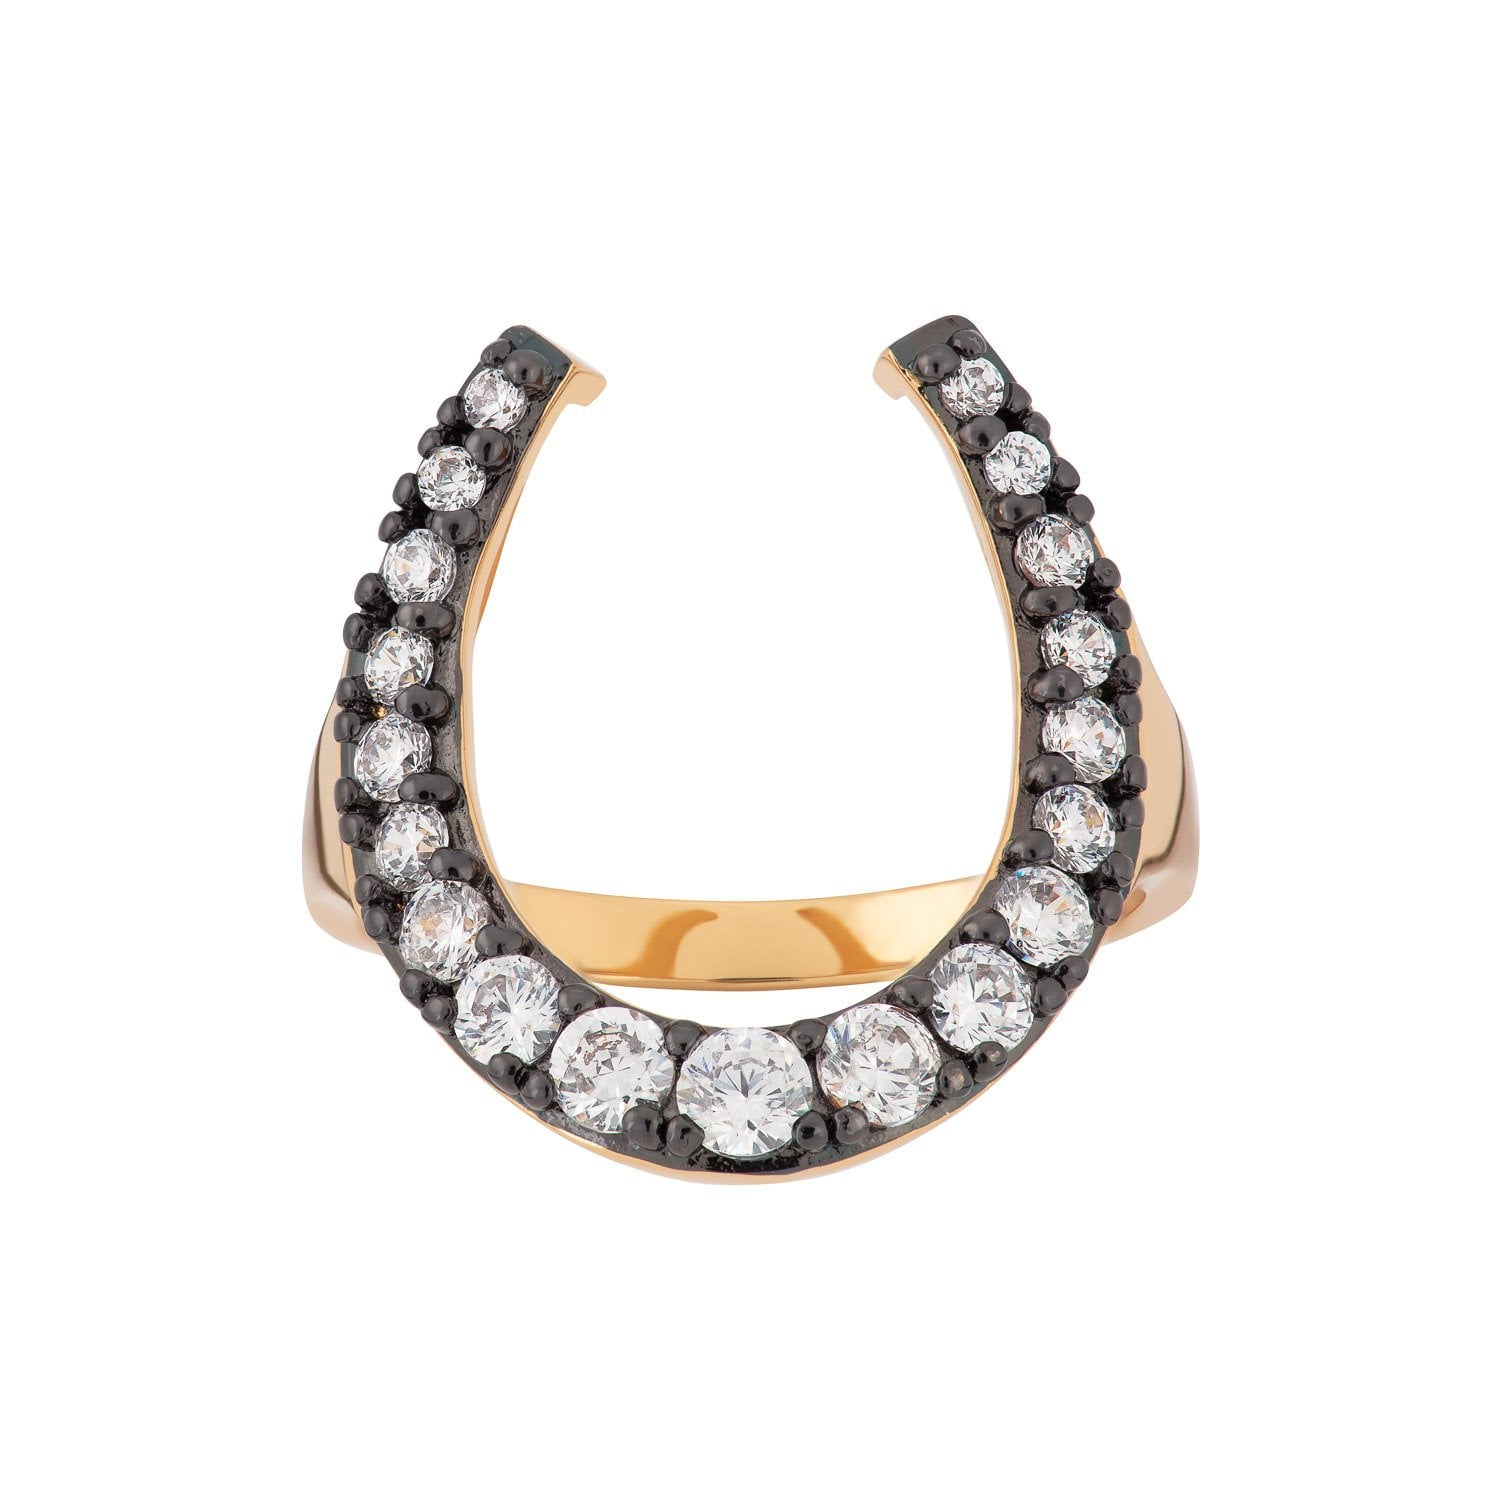 Black Horseshoe Ring with Clear Stones | Gold Rings for Women by Scream Pretty